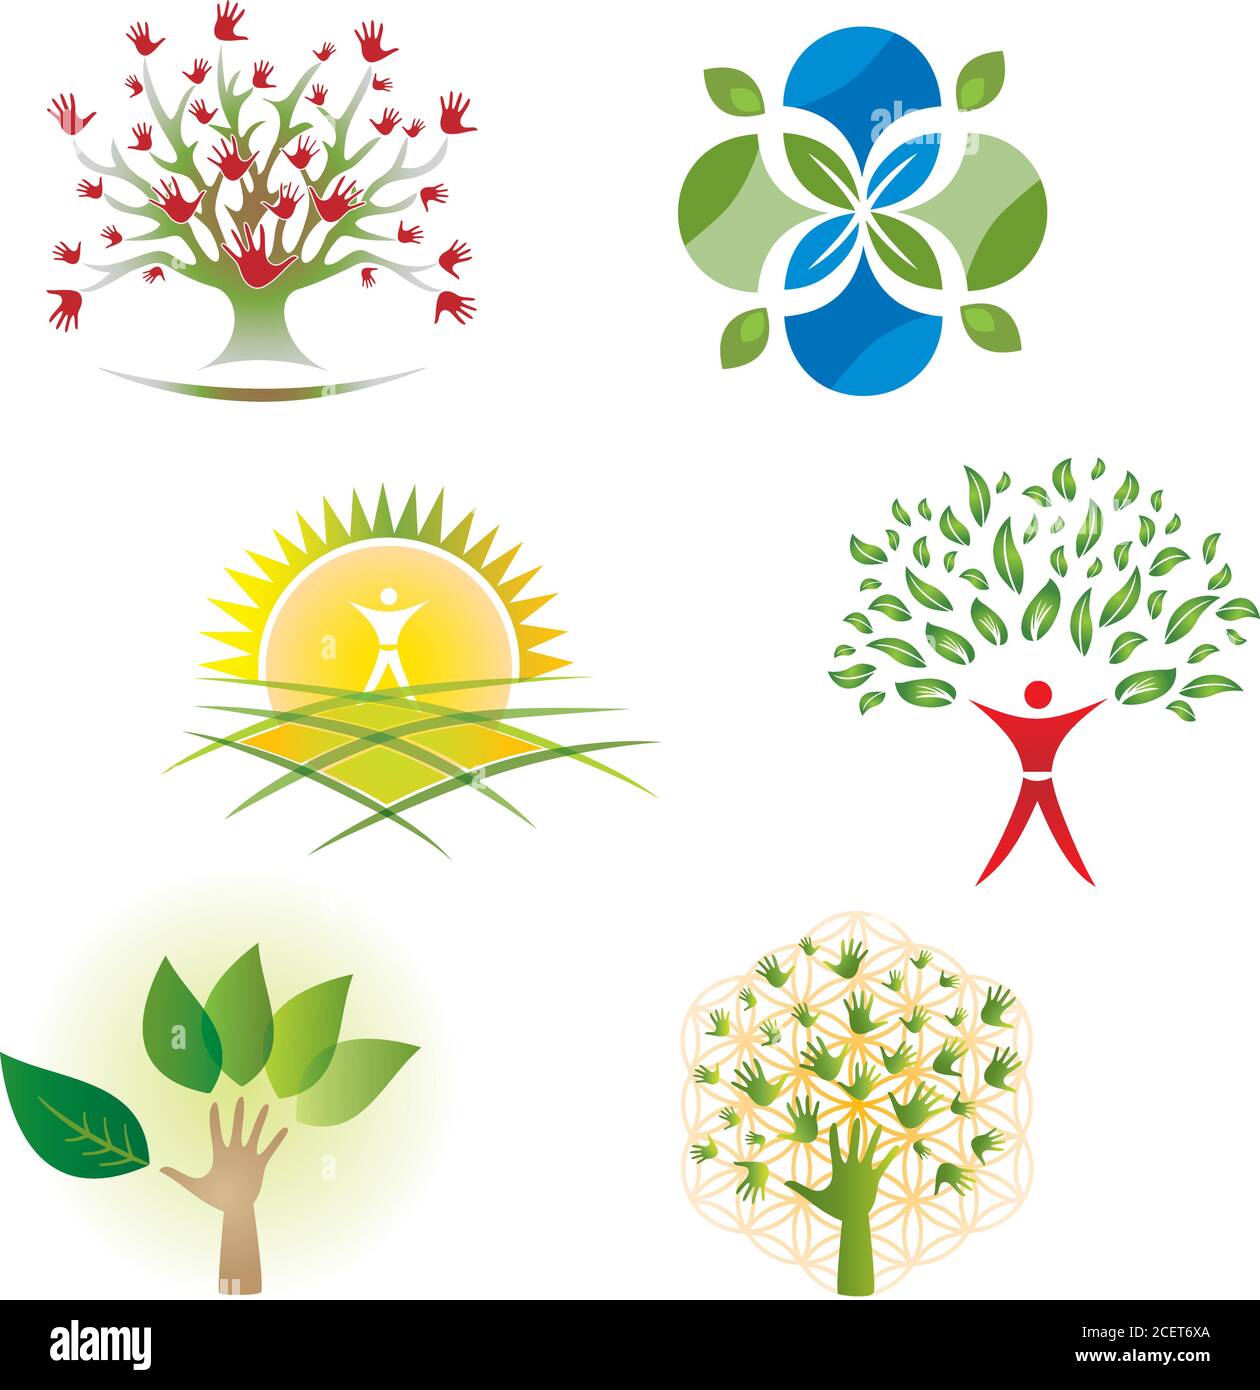 Set of Tree Nature Foliage and Hands Icons for Logo Design Stock Vector